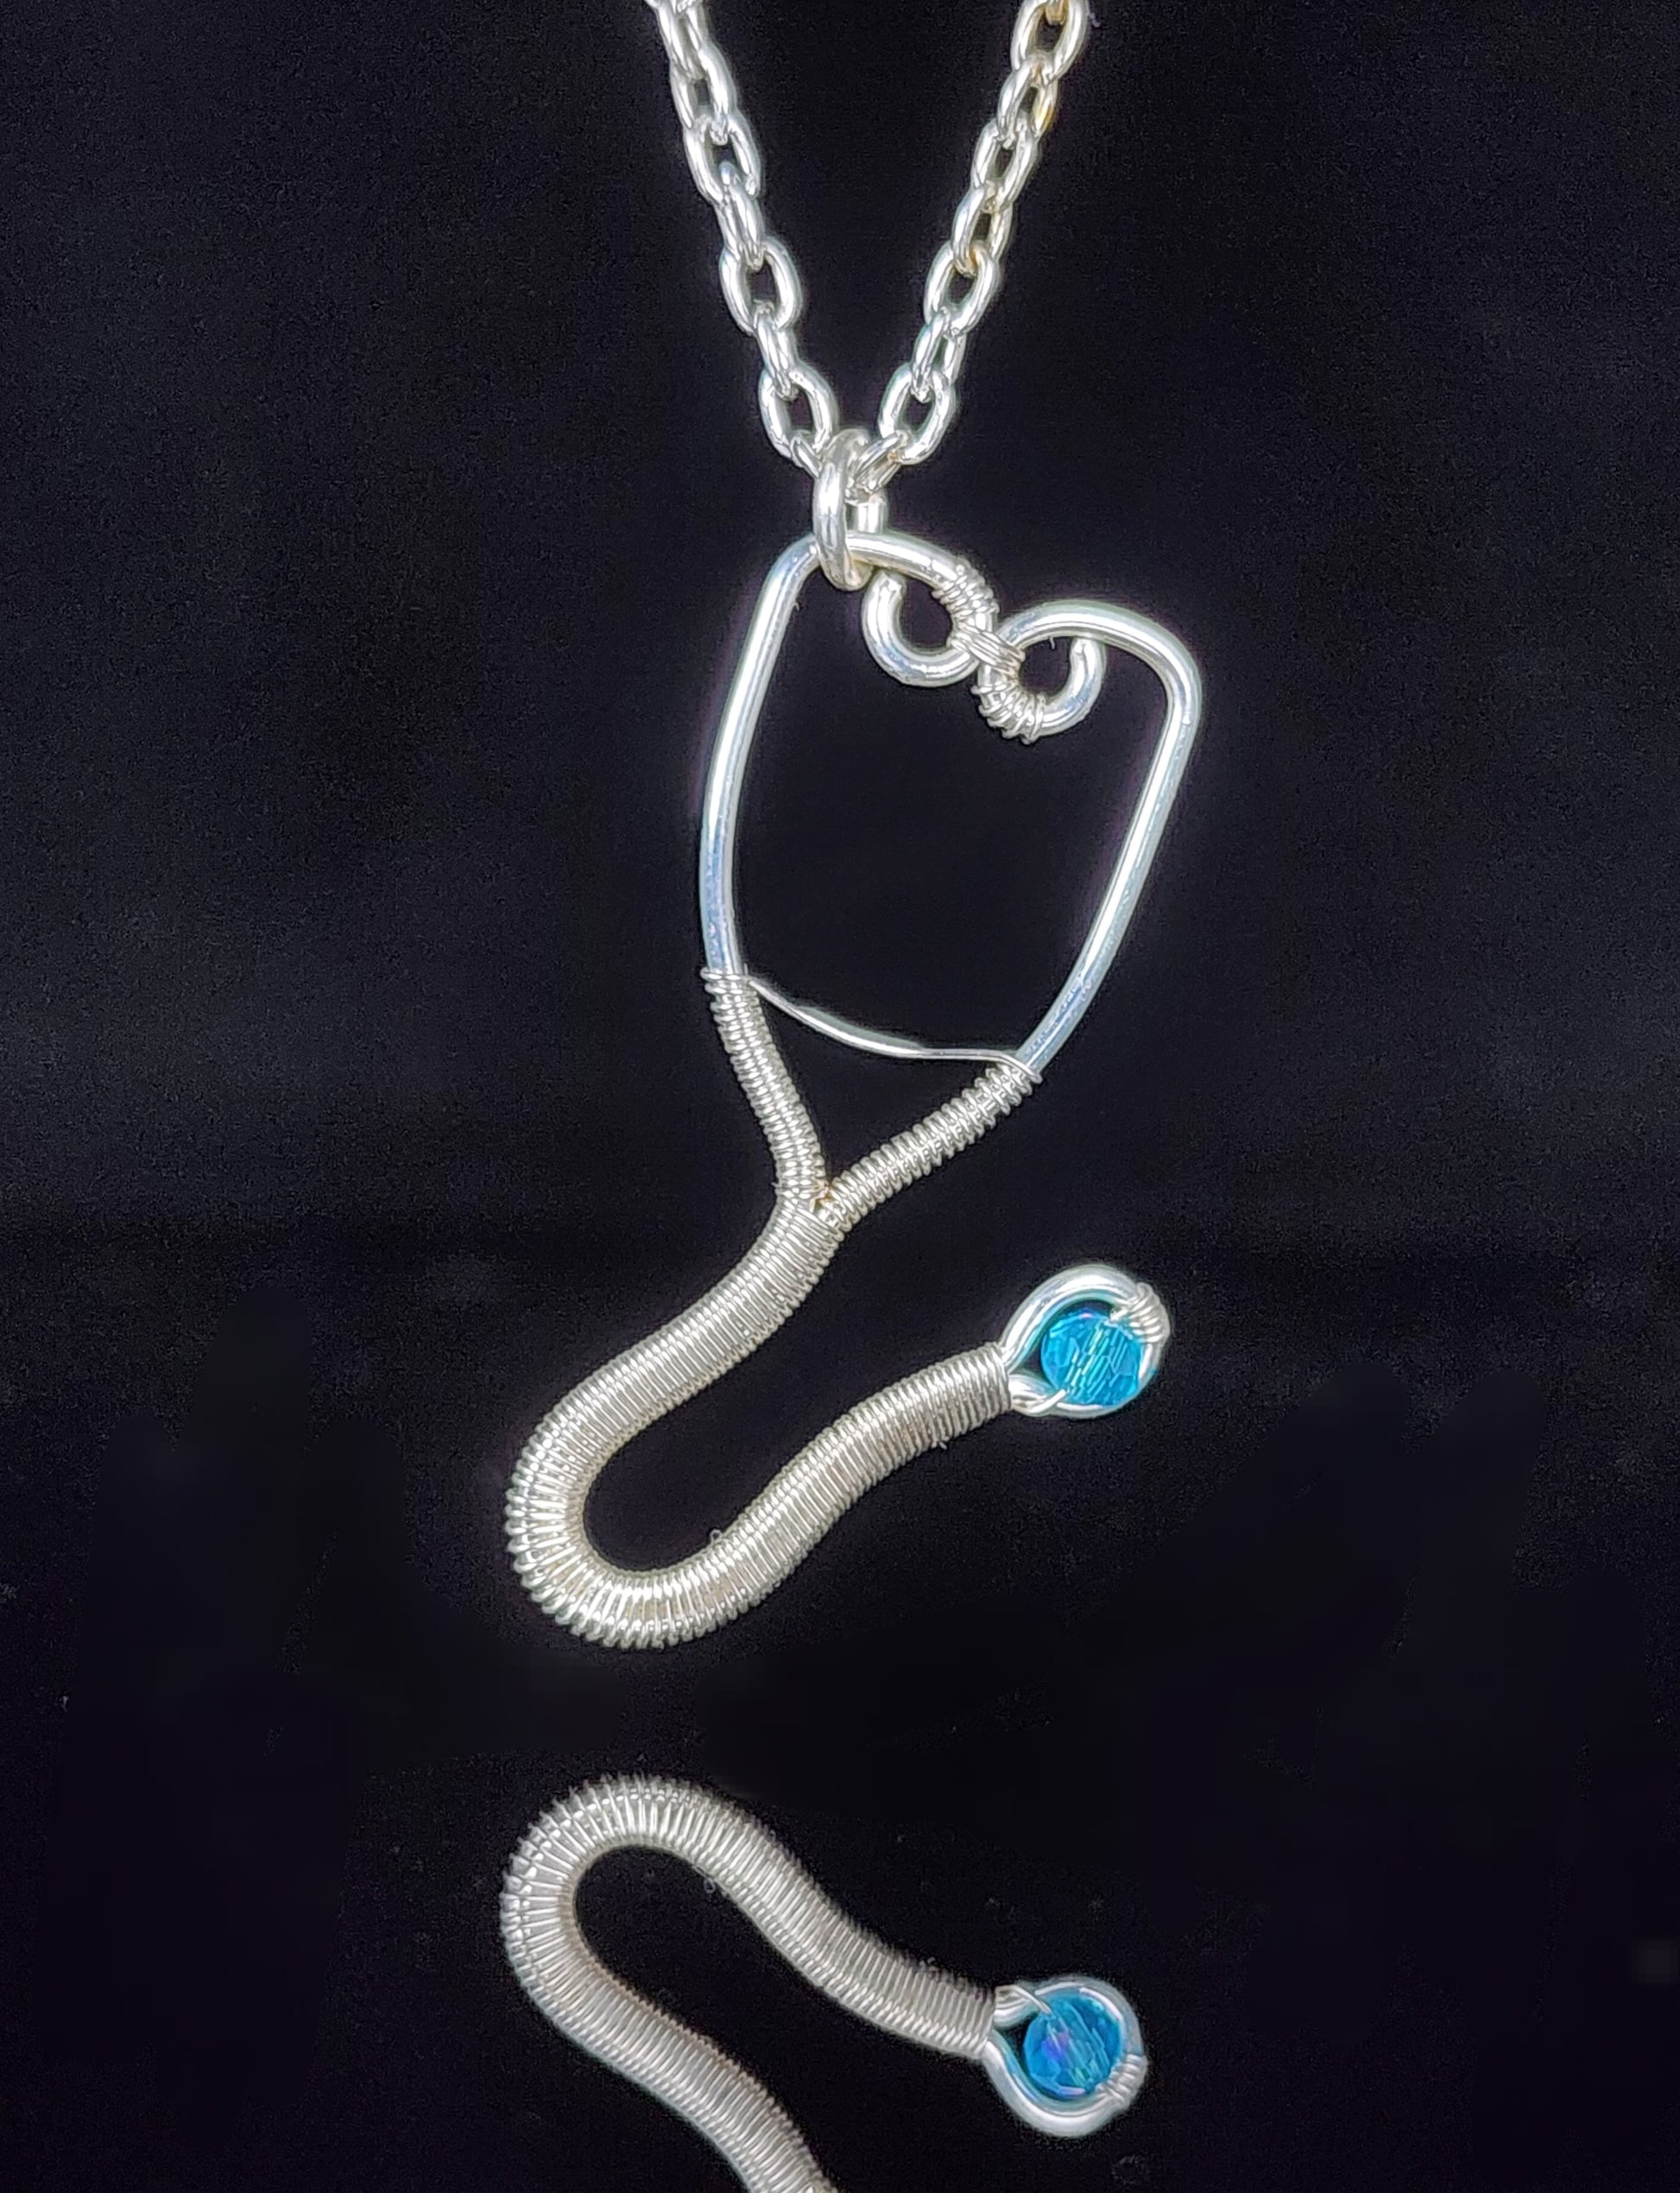 Hand woven silver colored artistic wire  Stethoscope design  Blue Swarovski bead as the diaphragm portion of the stethoscope  1.44" long x .8" wide  Silver colored chain necklace with lobster clasp  Care instructions and cleaning cloth provided